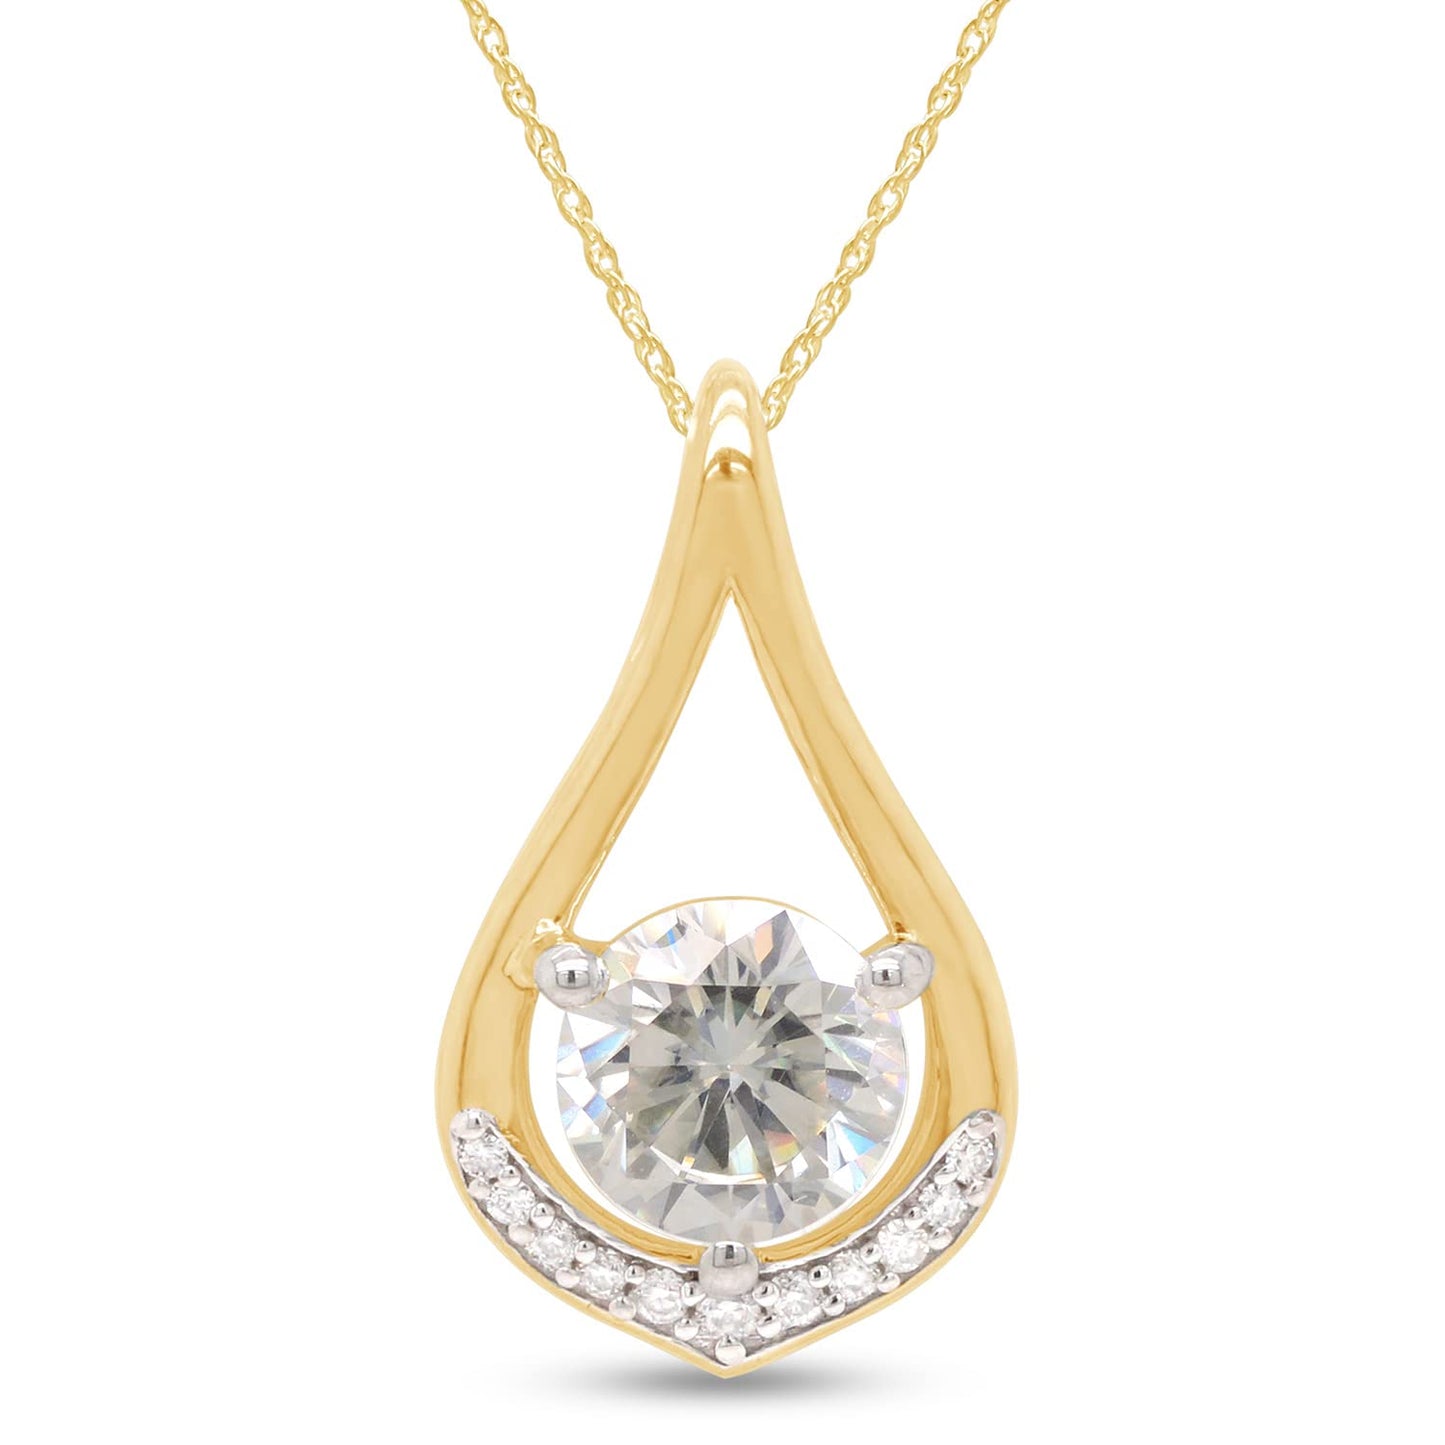 Load image into Gallery viewer, 1 Carat Center Stone 6.5MM Lab Created Moissanite Diamond Dew Drop Pendant Necklace In 925 Sterling Silver (1 Cttw)
